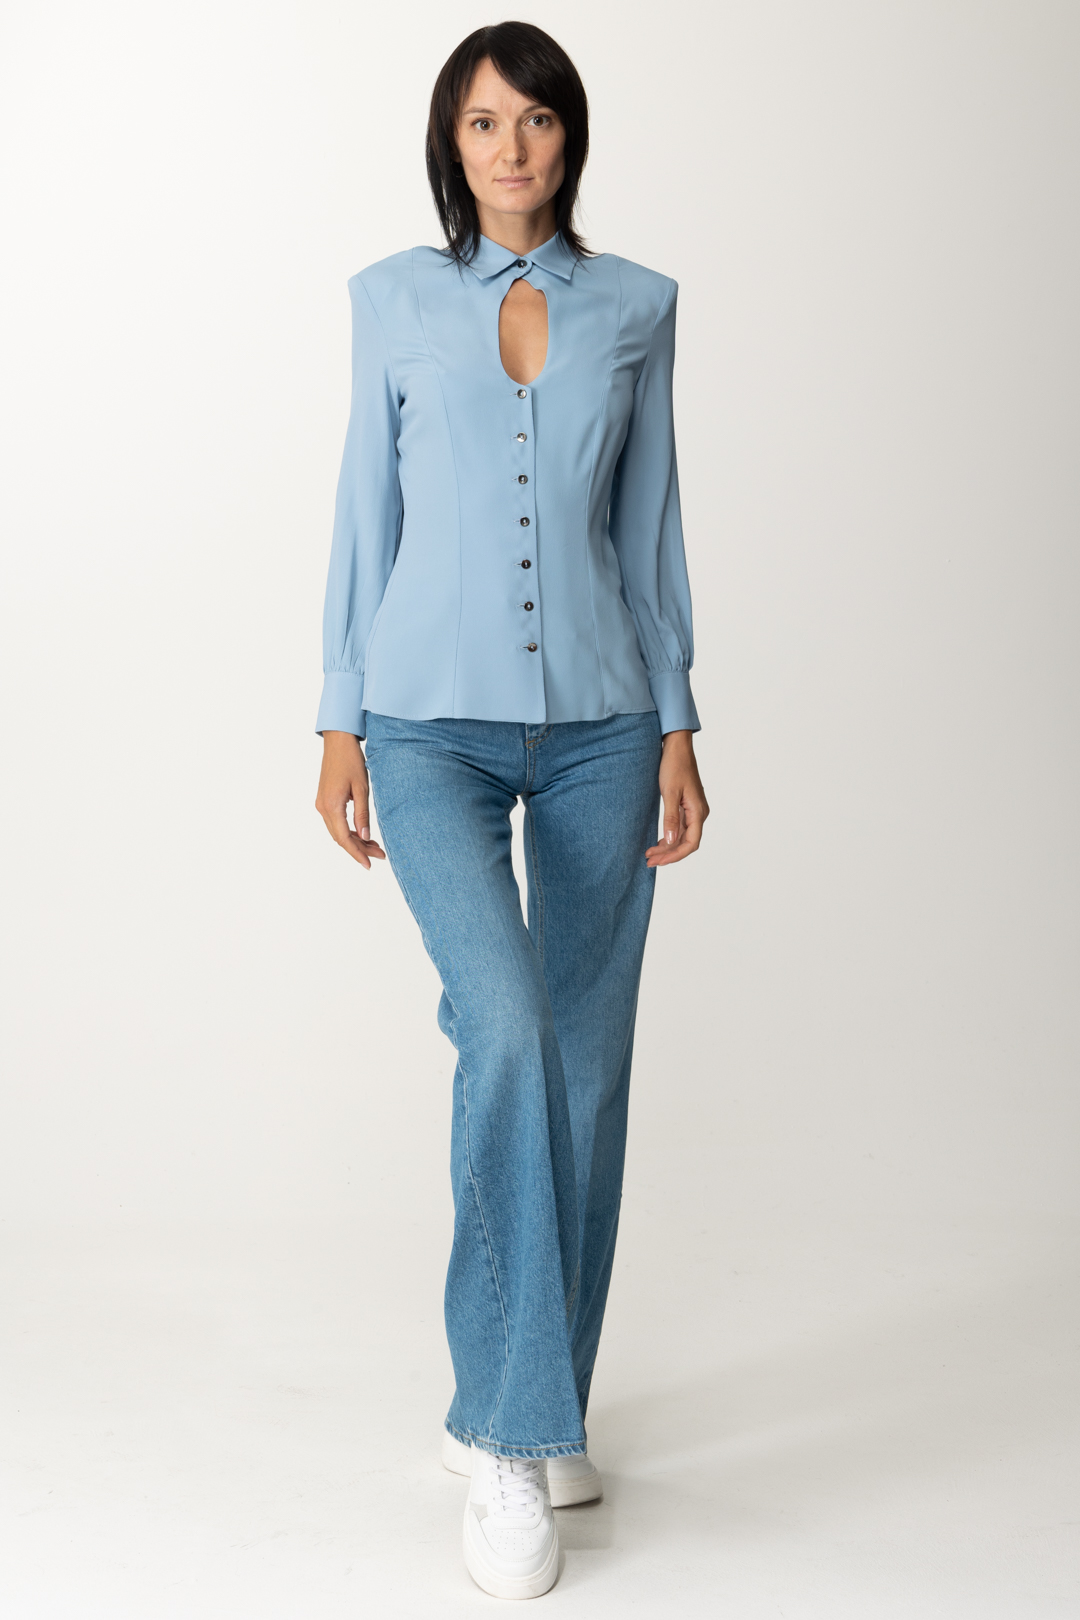 Preview: Simona Corsellini Shirt with cut-out SKY WAY